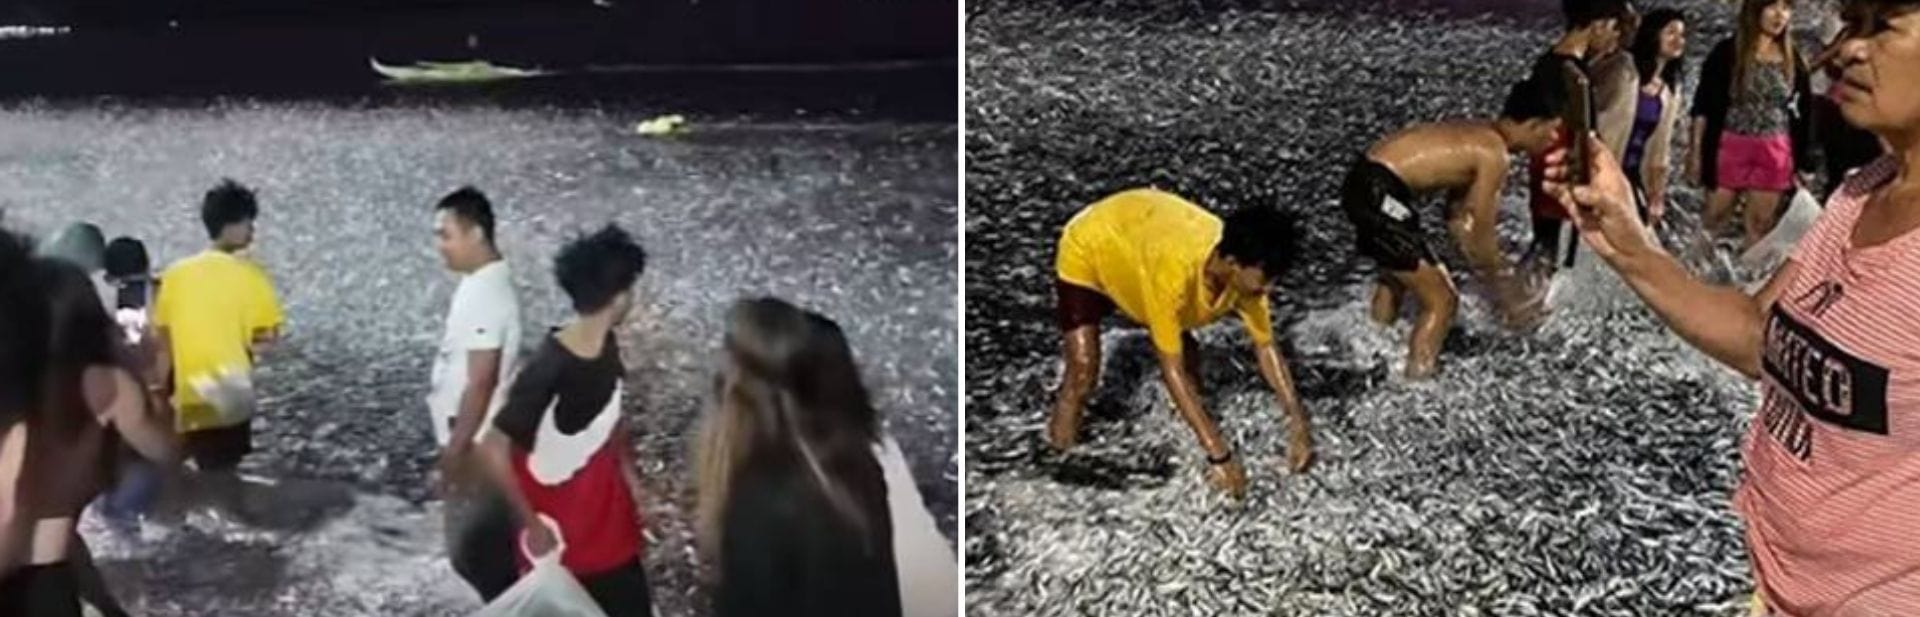 A Shimmering Surprise: Thousands of Sardines Wash Up on Shore, Uniting a Community